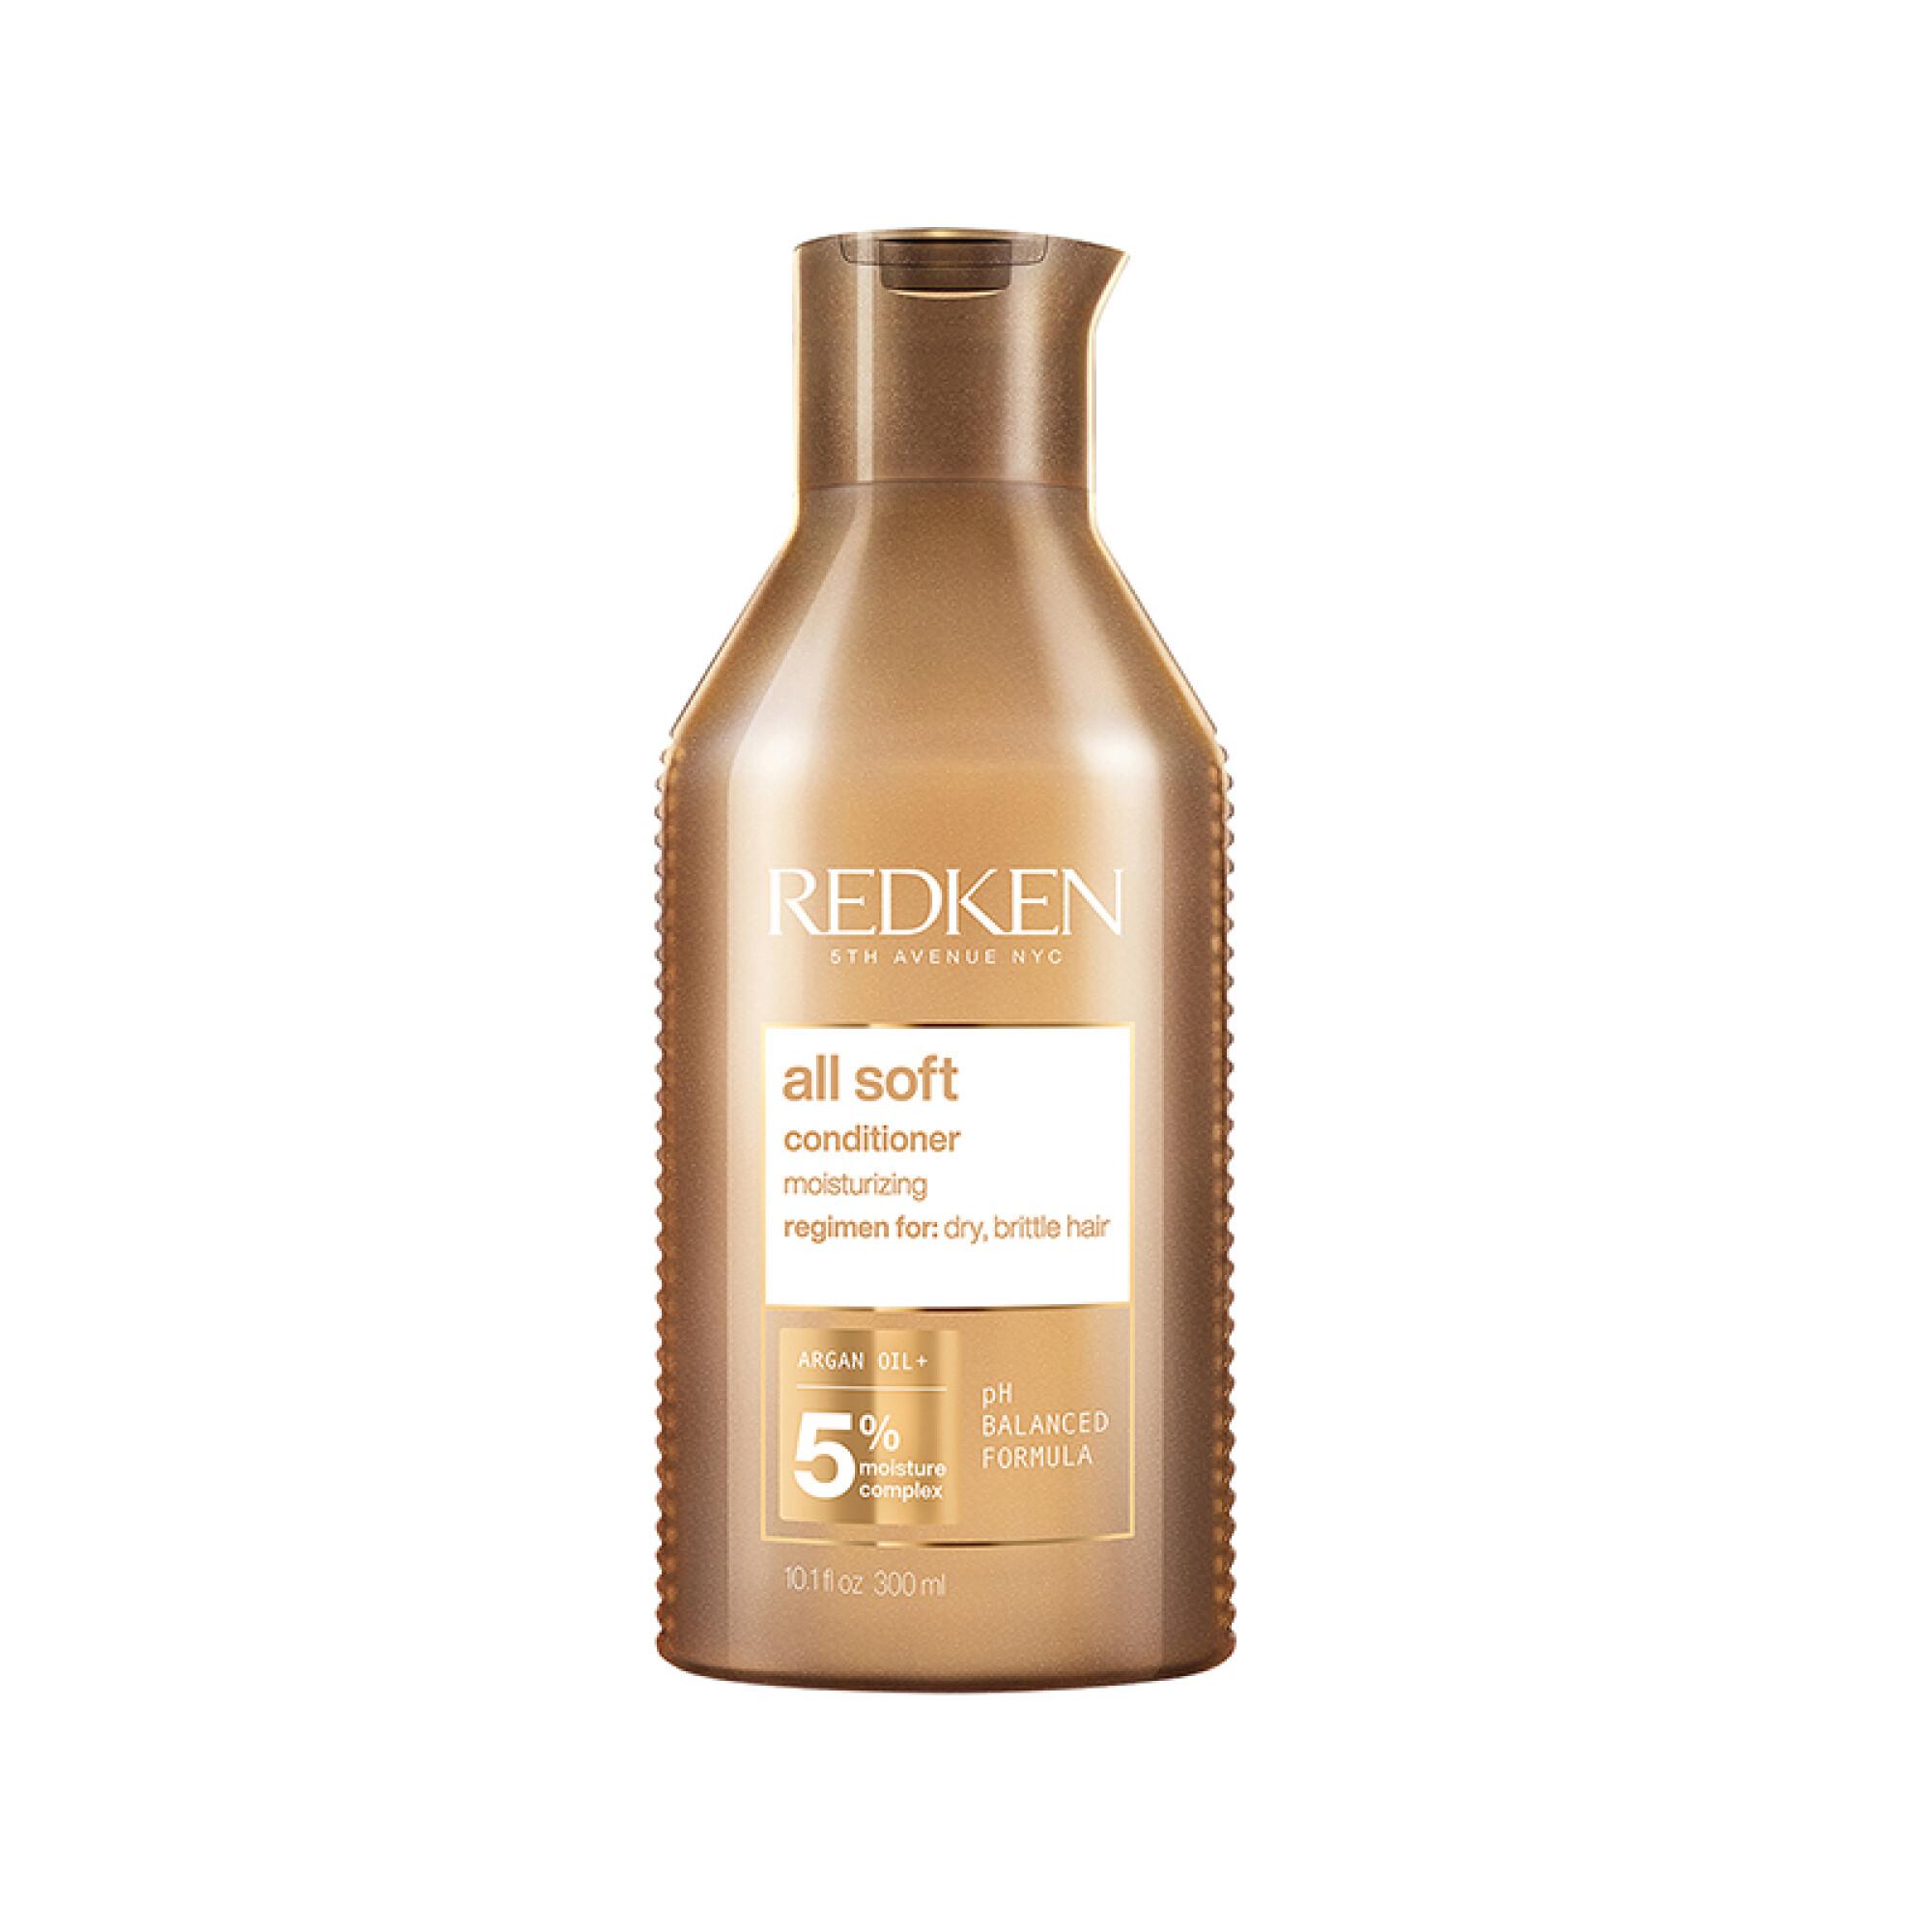 All Soft Conditioner Redken 250ml n/a 